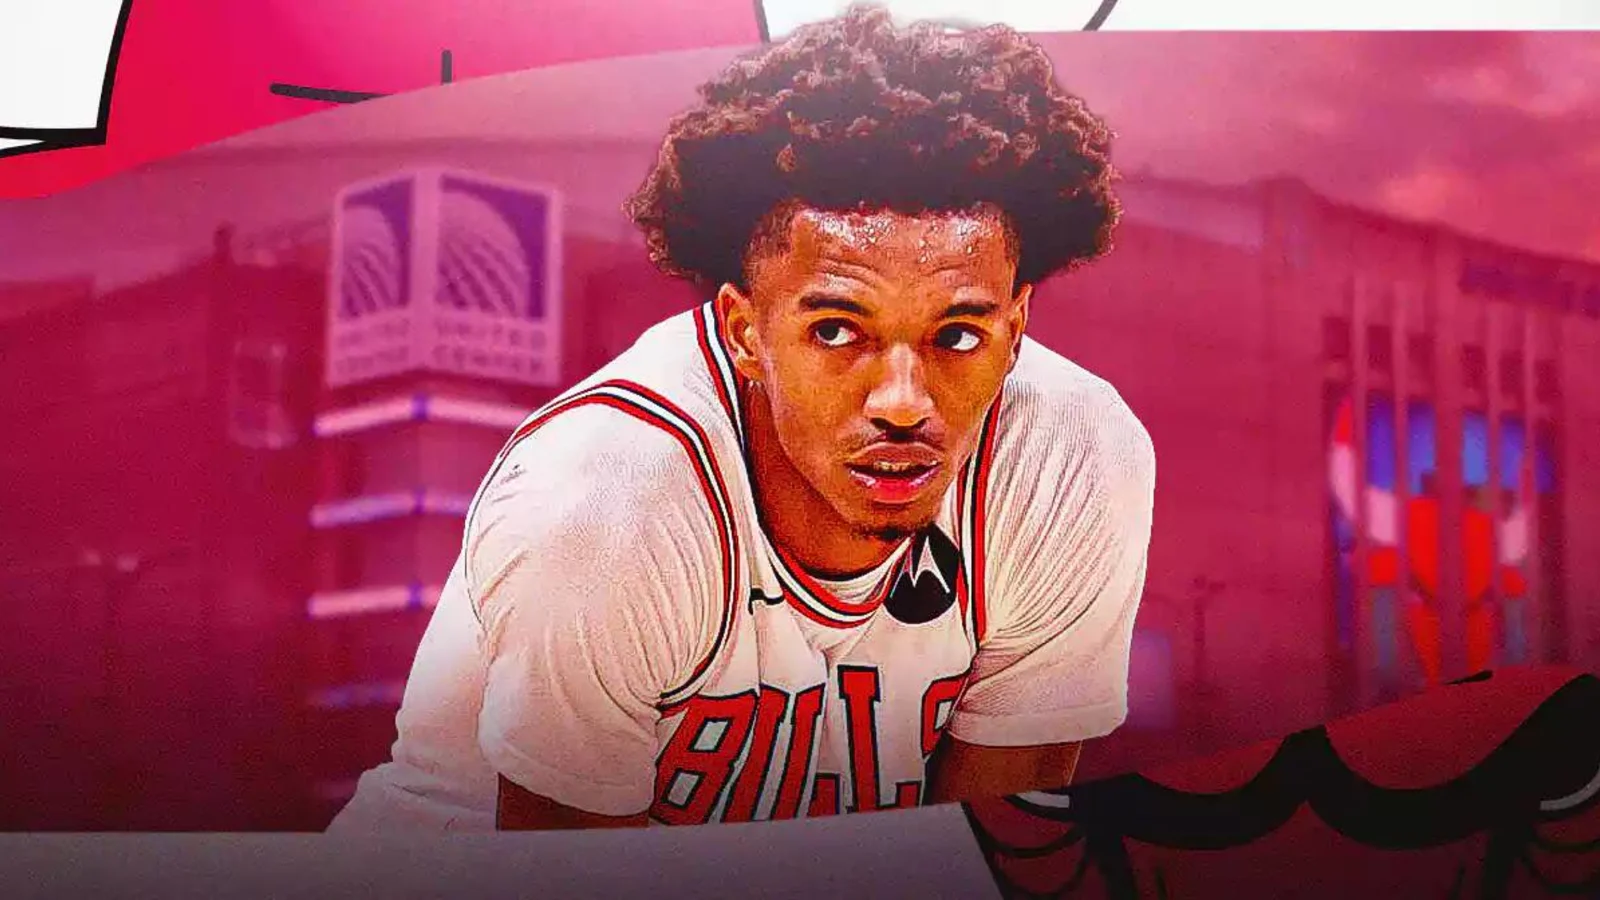 Bulls: Why Julian Phillips didn’t play in ugly loss to Pistons, per Billy Donovan